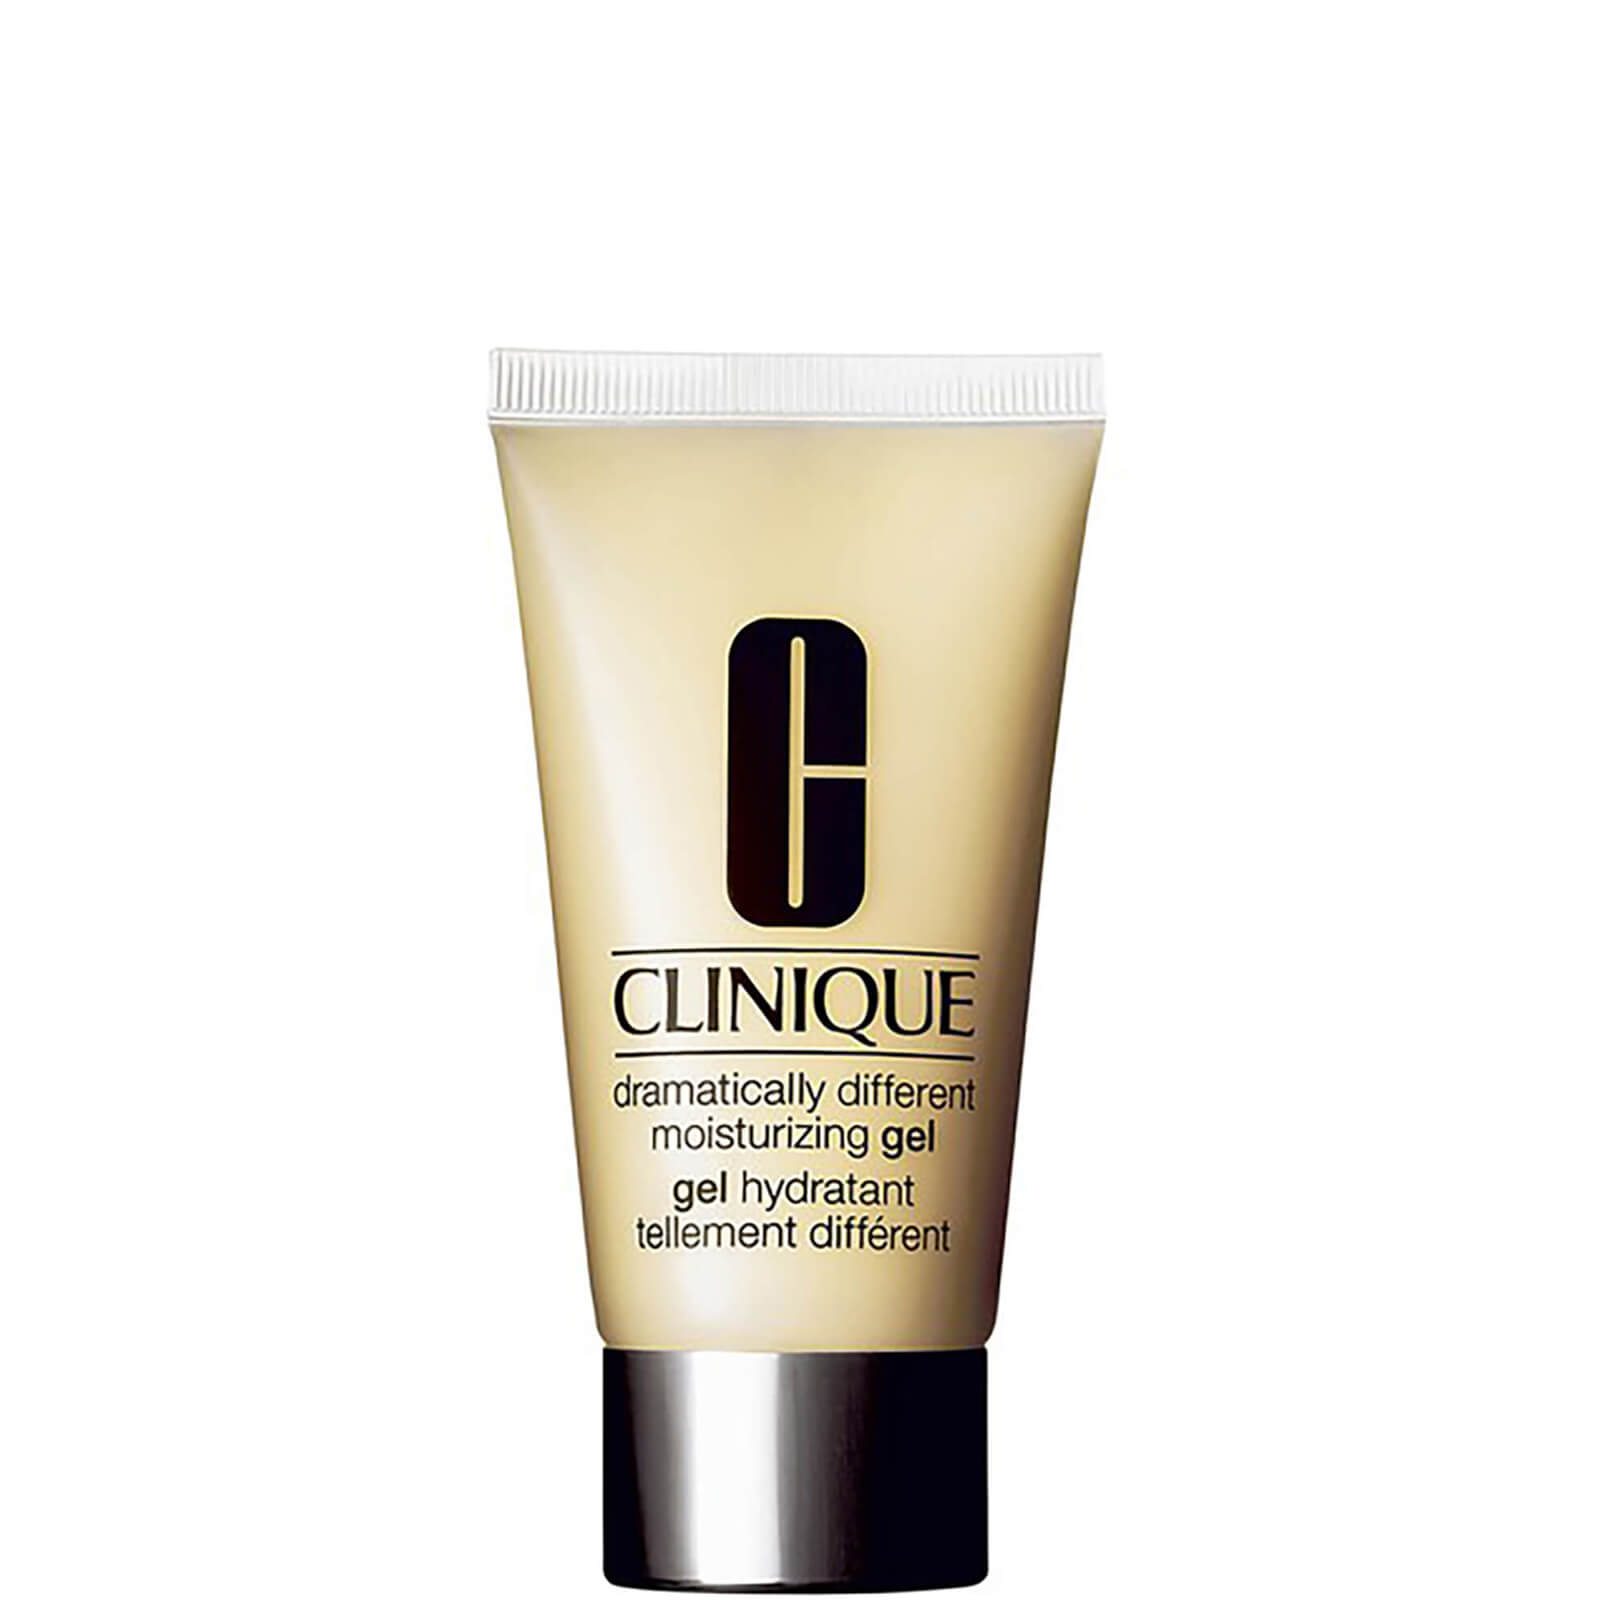 Image of Clinique Dramatically Different Moisturizing Gel 50ml in Tube